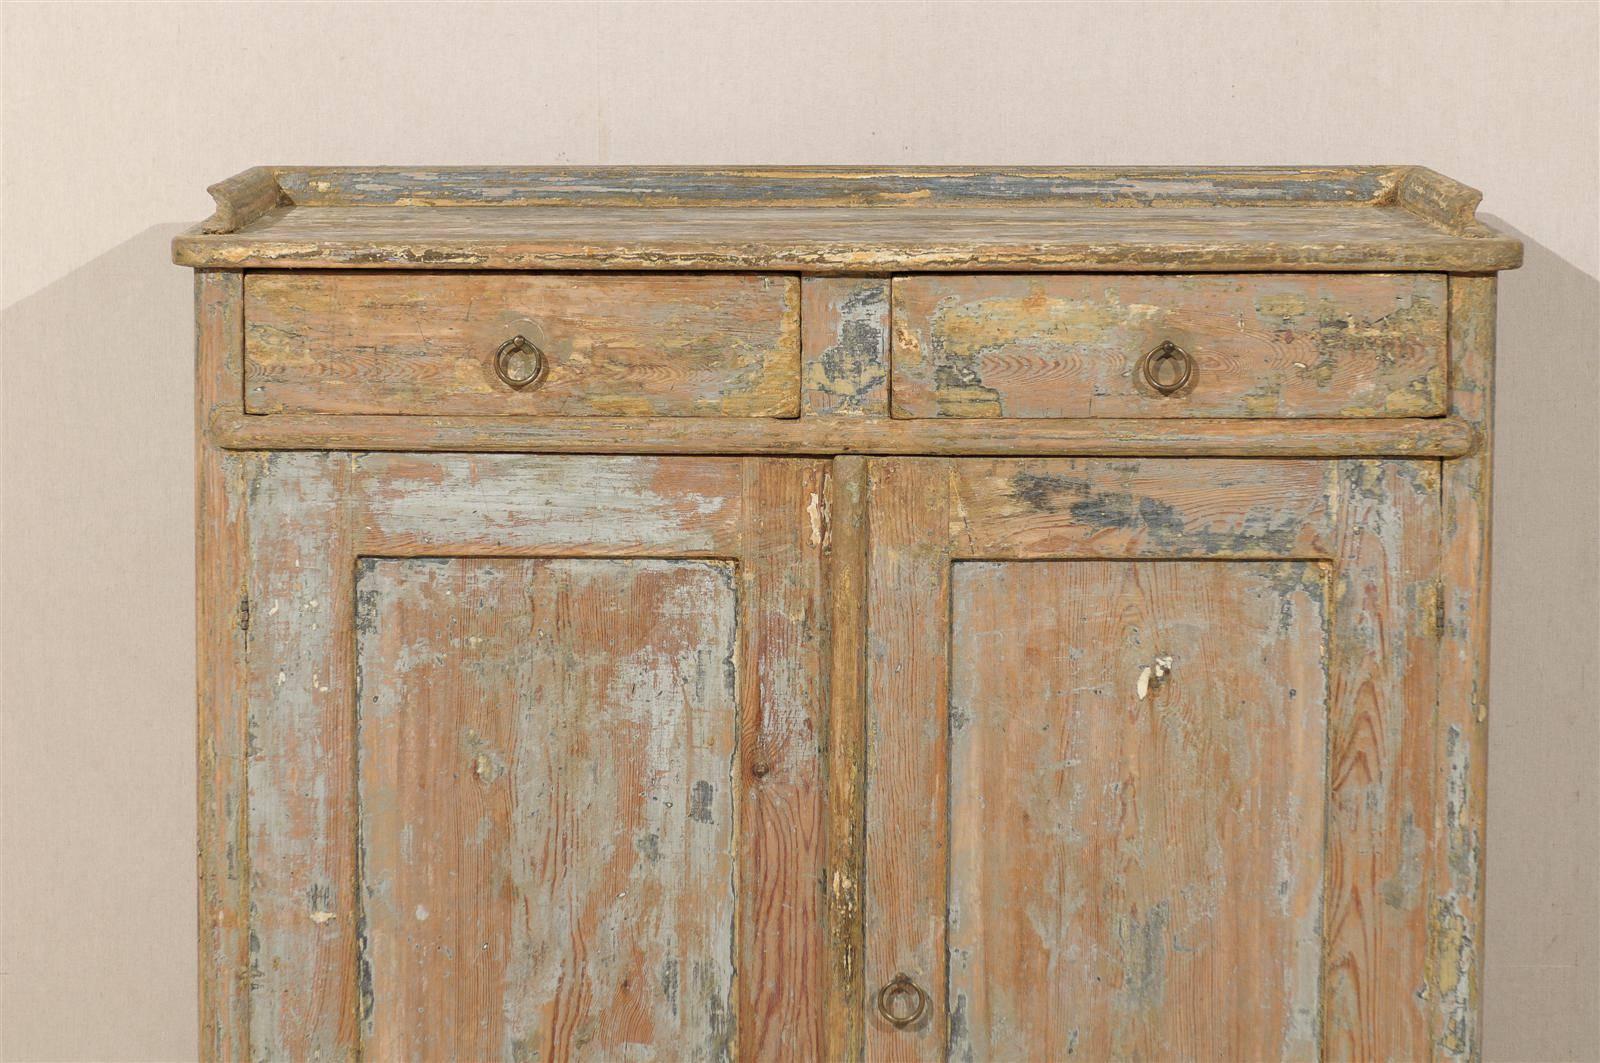 Painted Swedish 19th Century Fir Wood Sideboard with Two Drawers and Two Doors